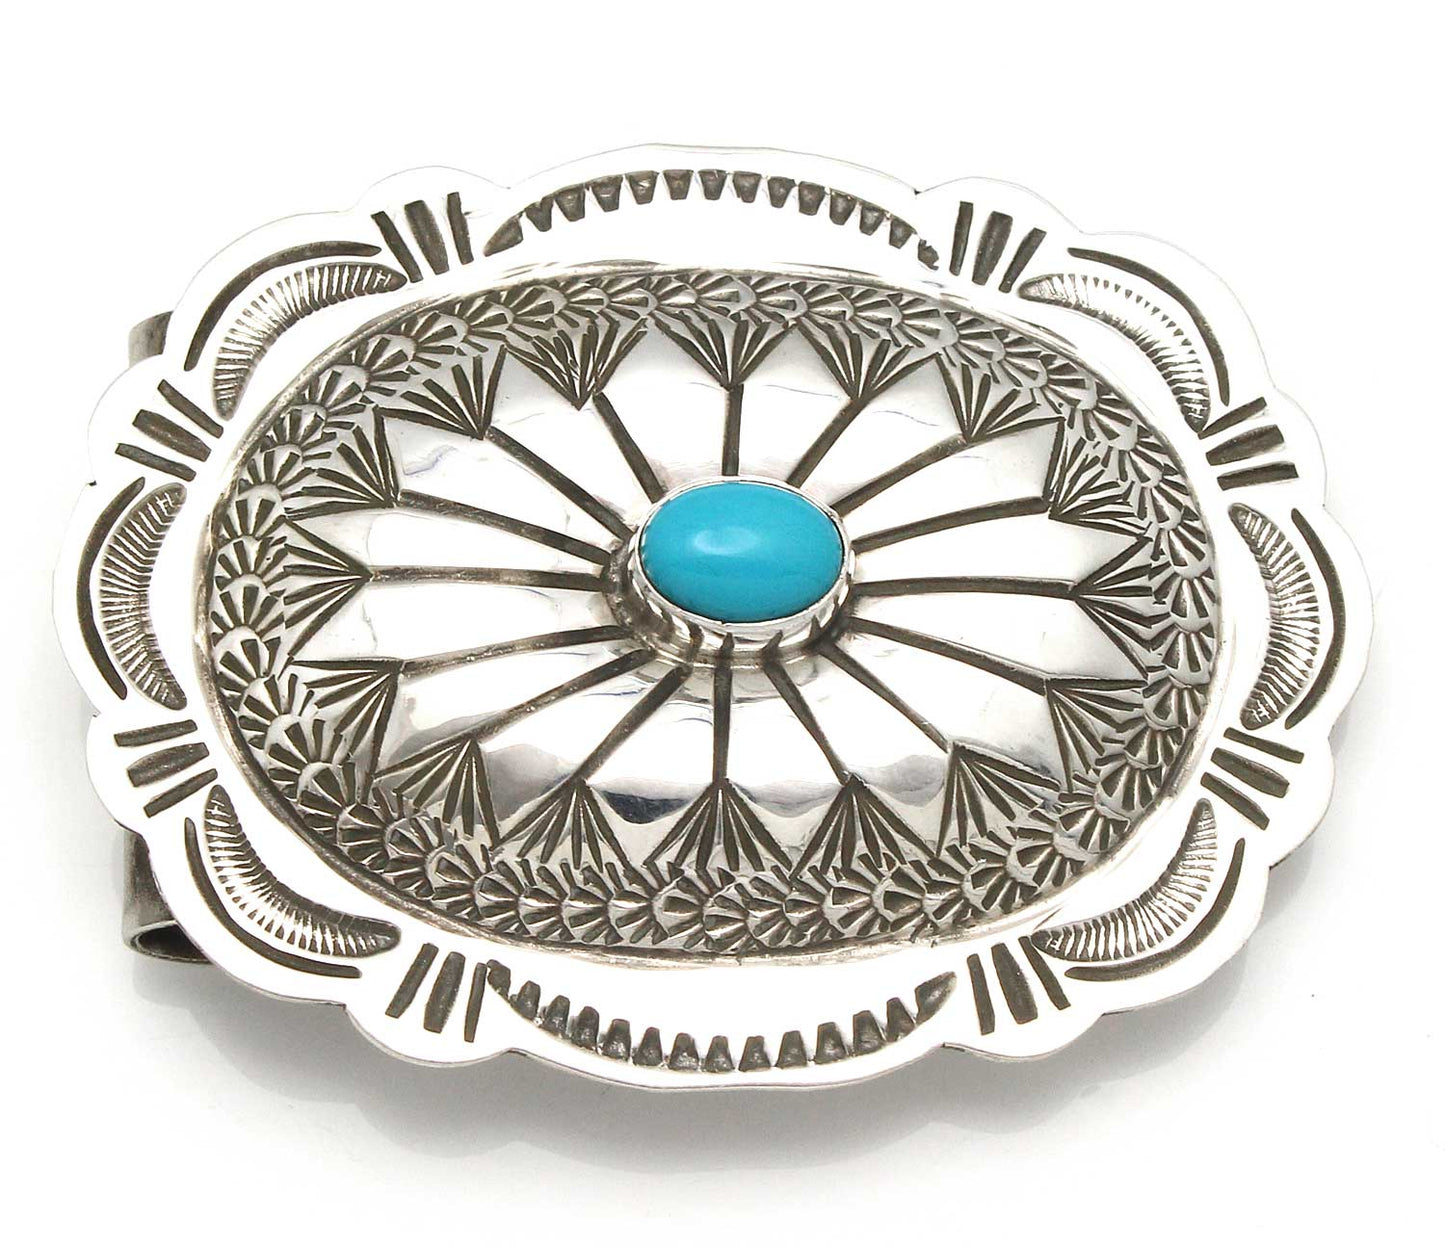 Stamped Silver & Turquoise Oval Money Clip By Blackgoat E